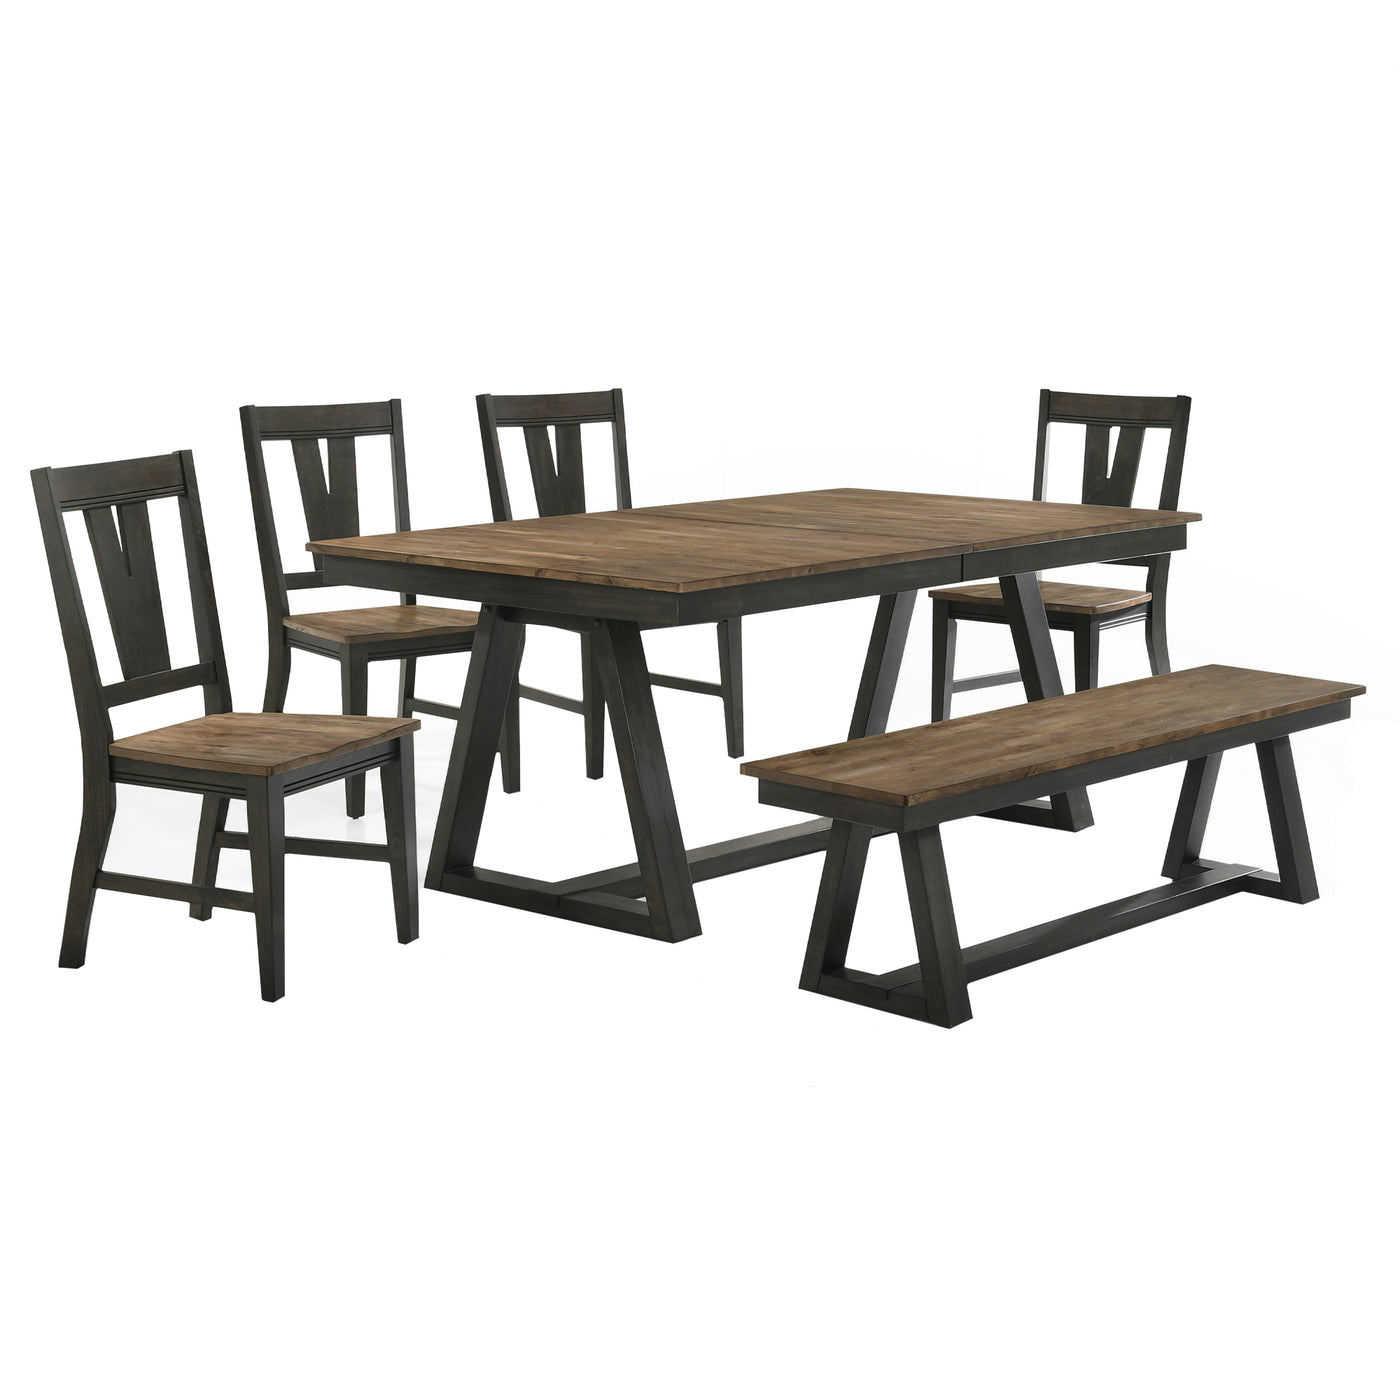 Addie 6-Piece Extendable Dining Set with Splat-Back Dining Chairs - Brown